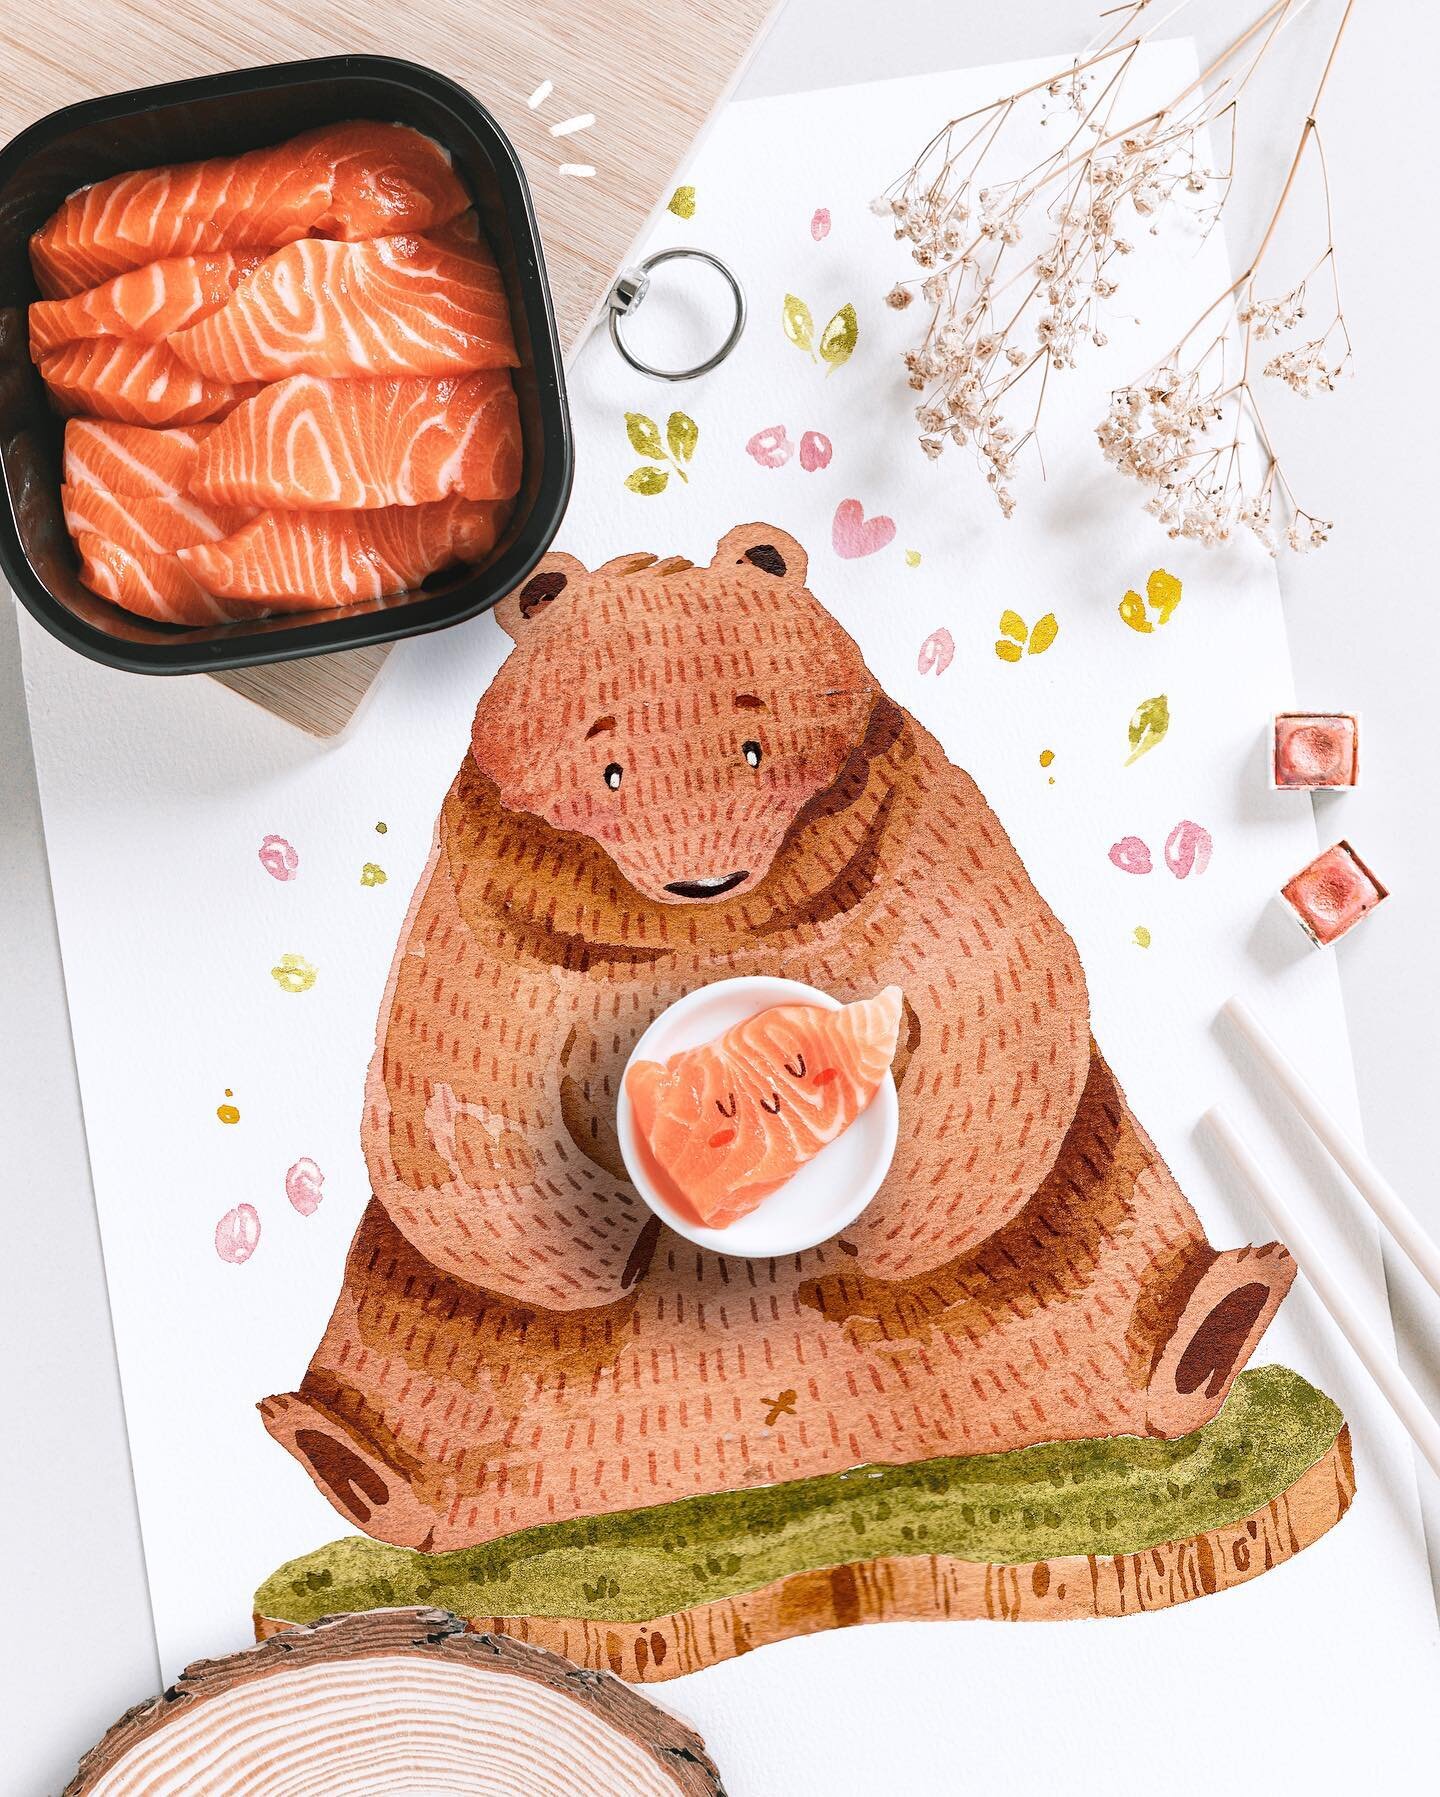 In my next life I want to be a grizzly bear, just live my life by the streams and eat salmon all day. 😌🍣
&bull;
Thank you @art_of_salmo for the generous serving of my fav food in the whole wide world!
&bull;
P/S:
Get a free cooler bag with a purcha